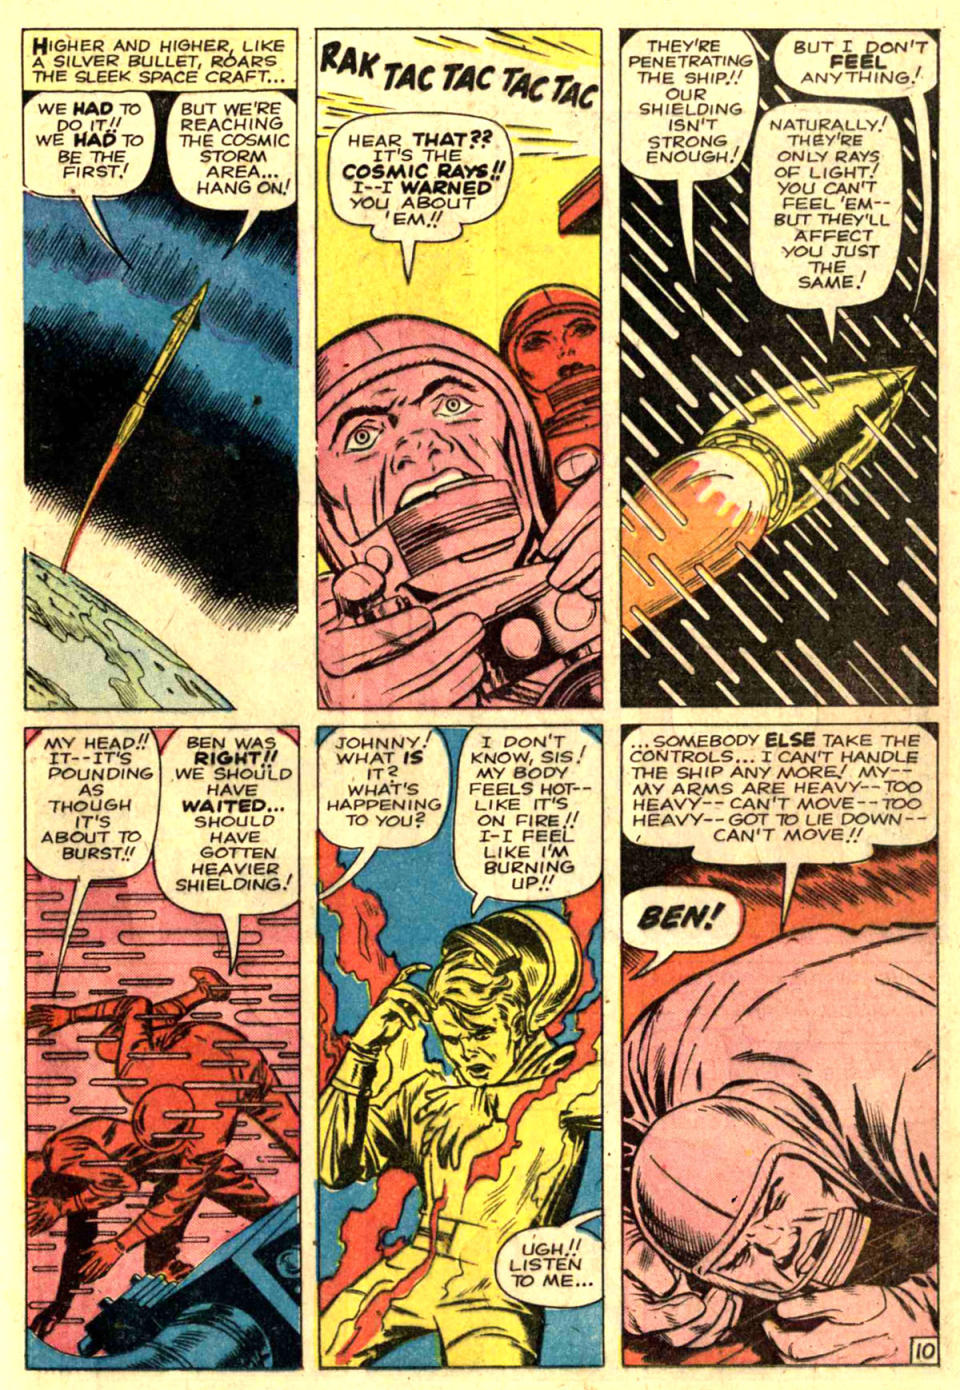 A series of comics panels show cosmic rays hitting the Fantastic Four